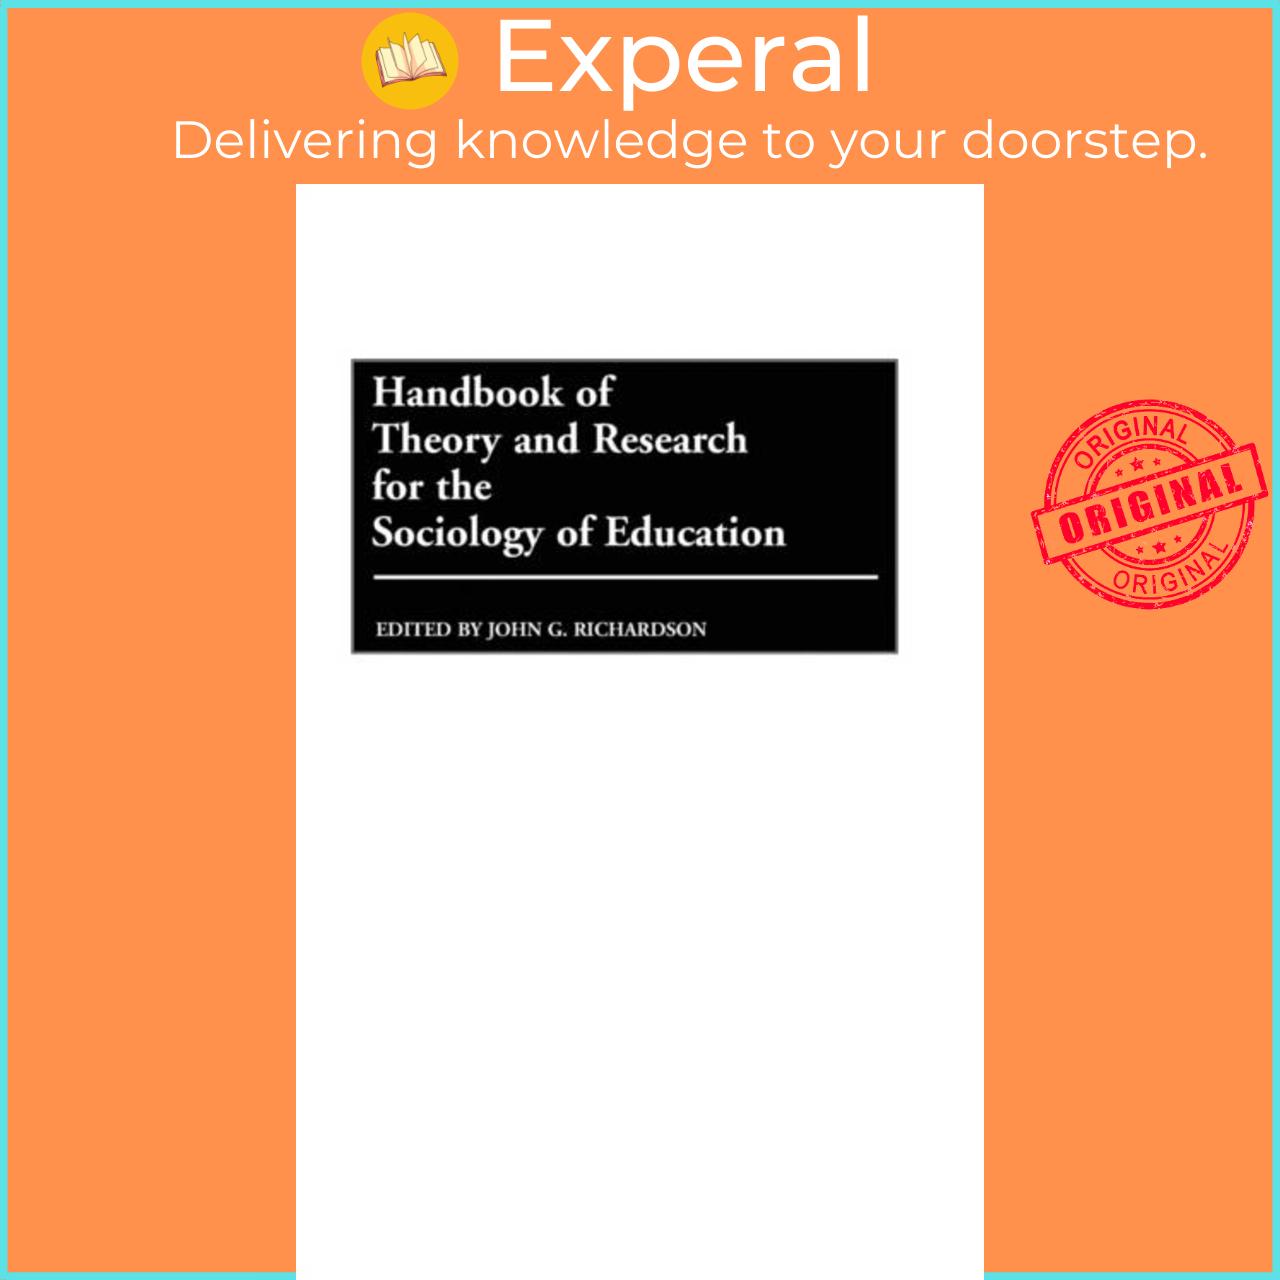 Sách - Handbook of Theory and Research for the Sociology of Educati by Professor John Richardson (UK edition, hardcover)